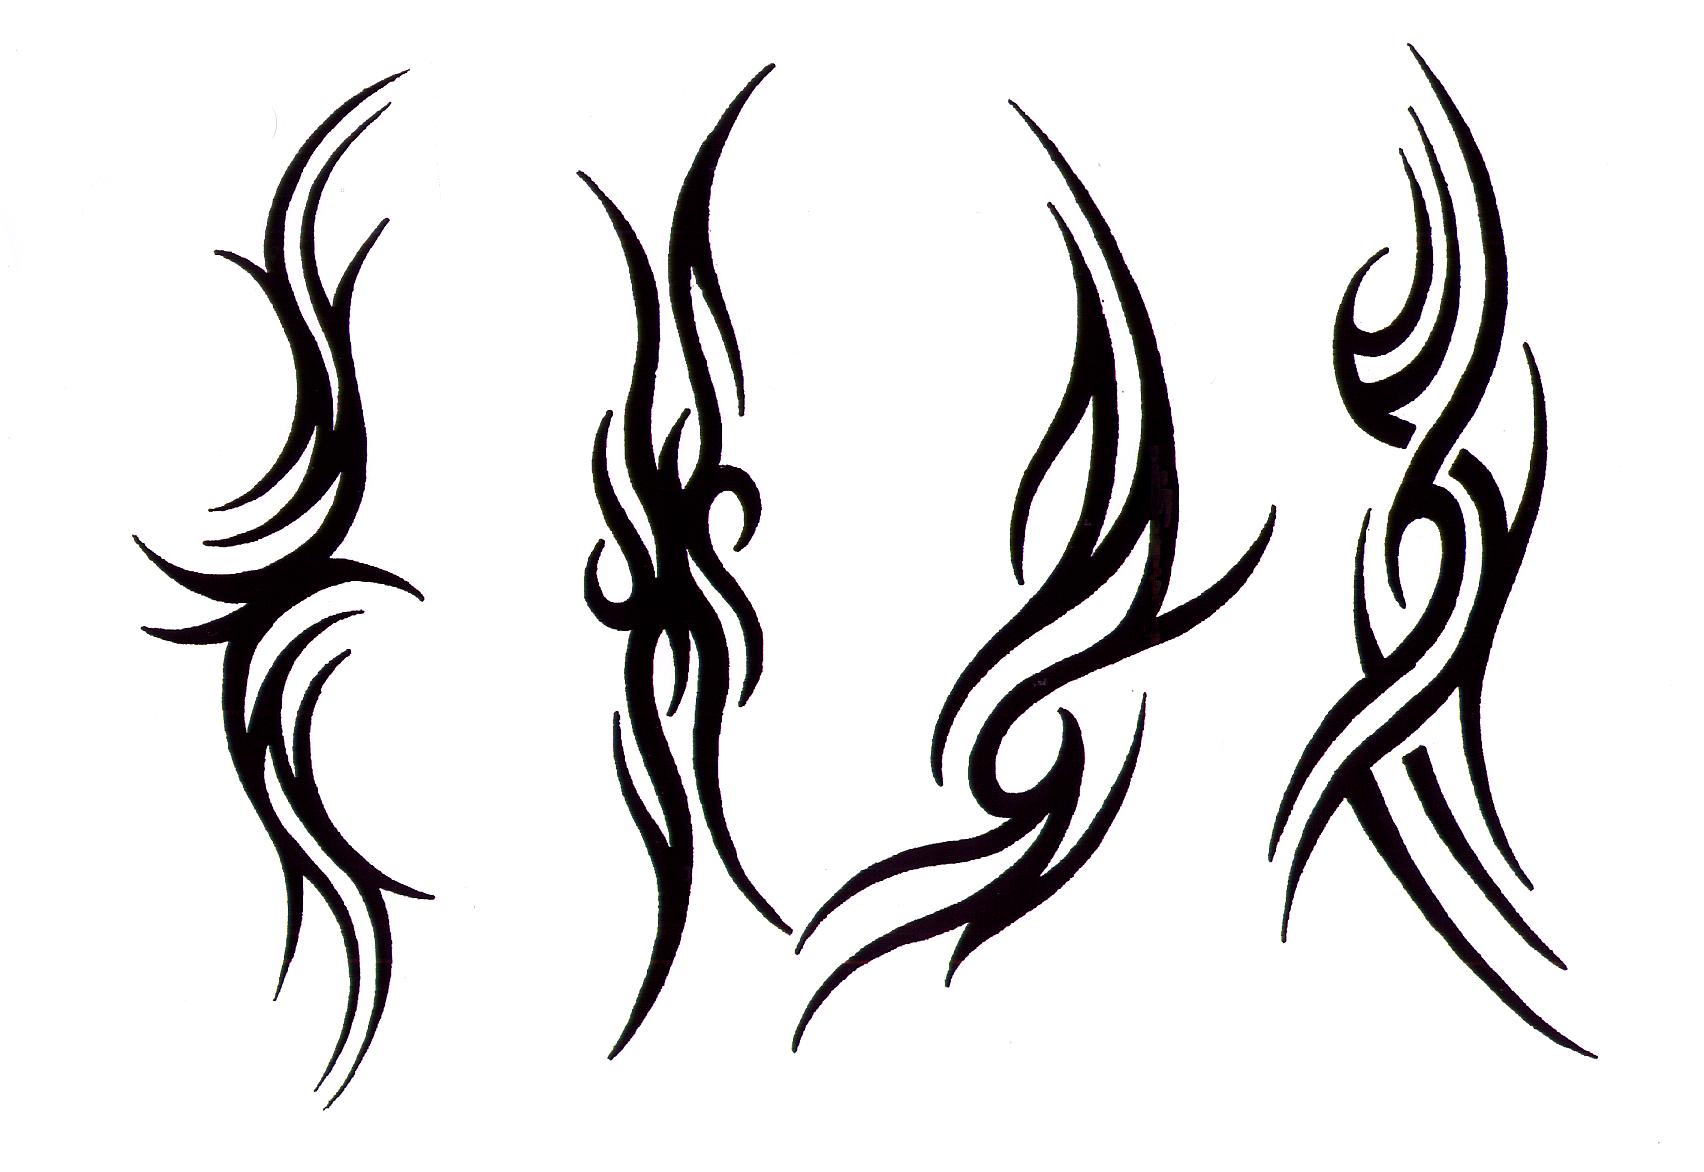 Simple Tribal Tattoo Vector Graphic Design. Royalty Free SVG, Cliparts,  Vectors, and Stock Illustration. Image 132087378.